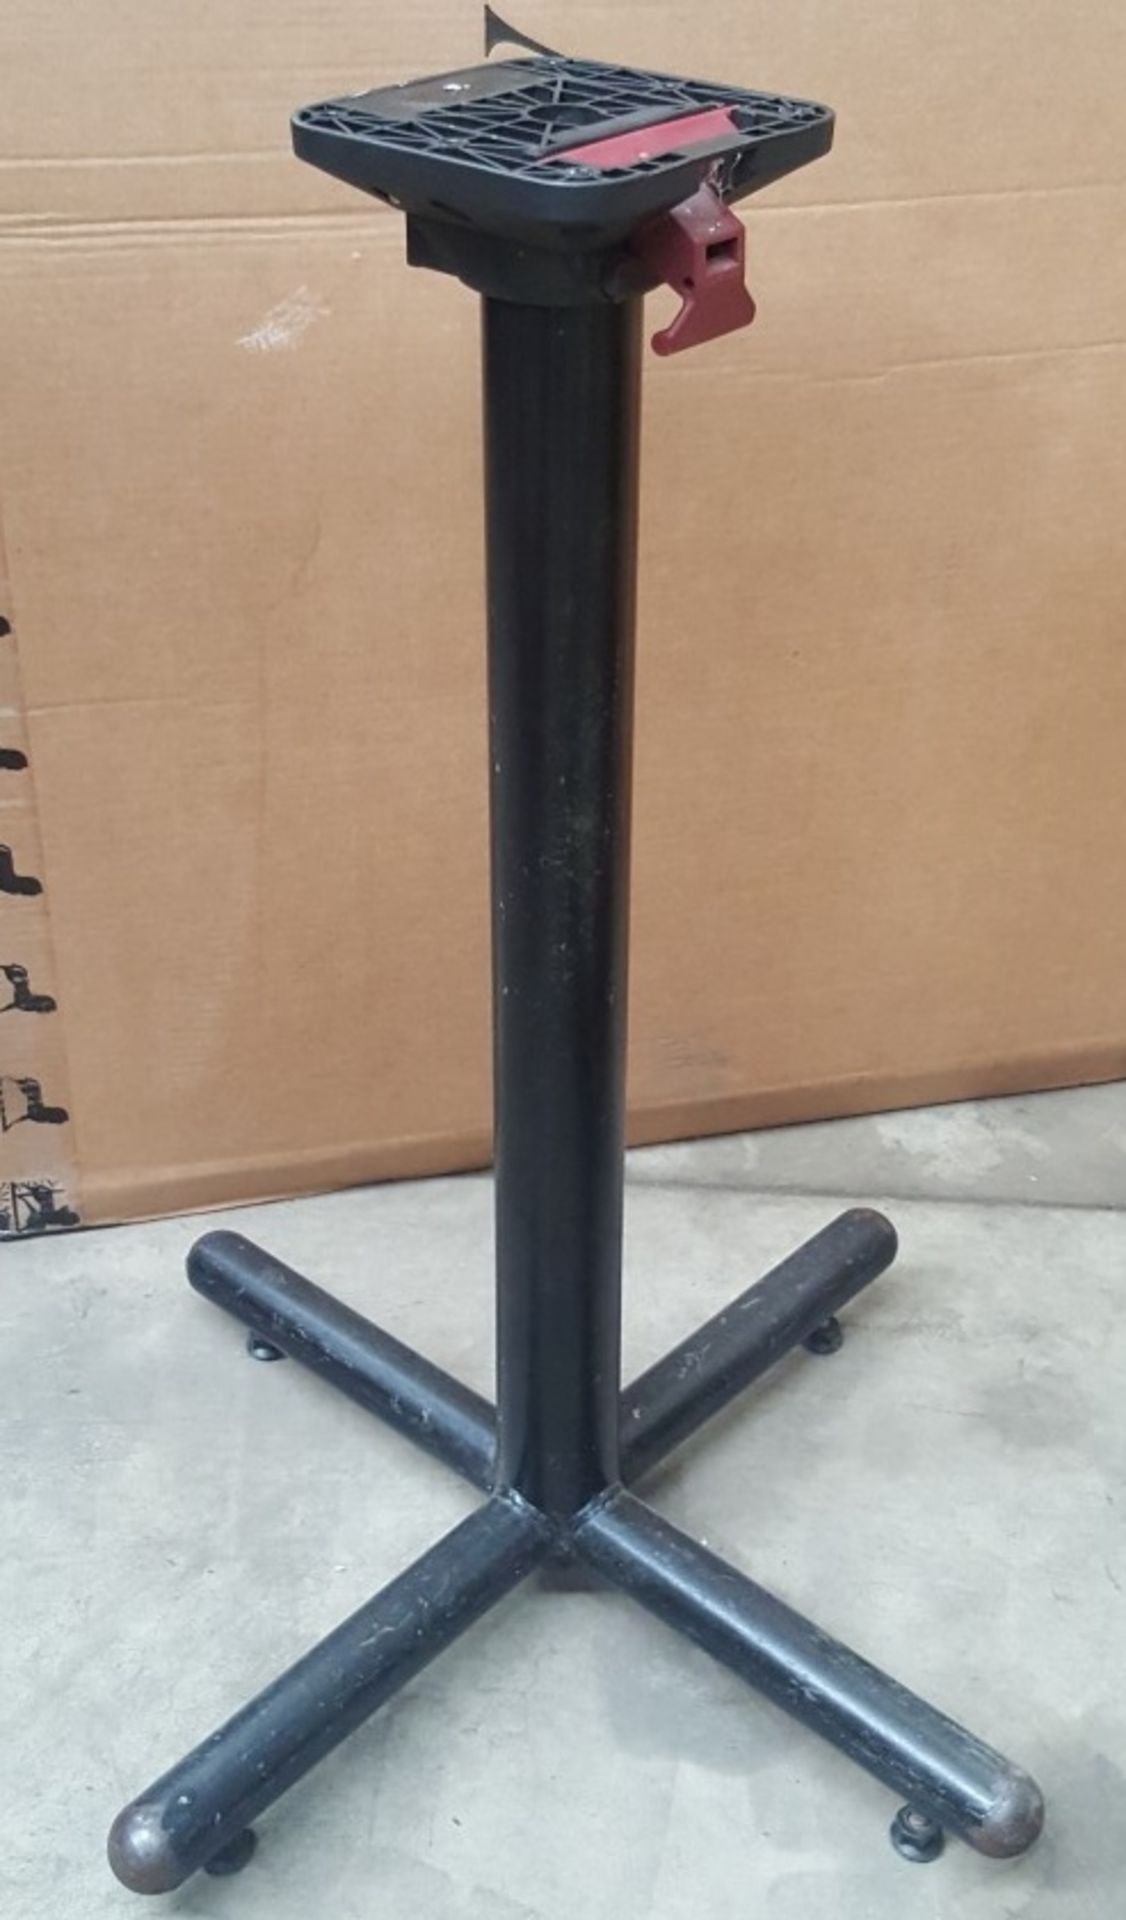 6 x 4 Cross Leg Metal Table Bases For Restaurant Tables - CL350 - Location: Altrincham WA14 - Image 2 of 4